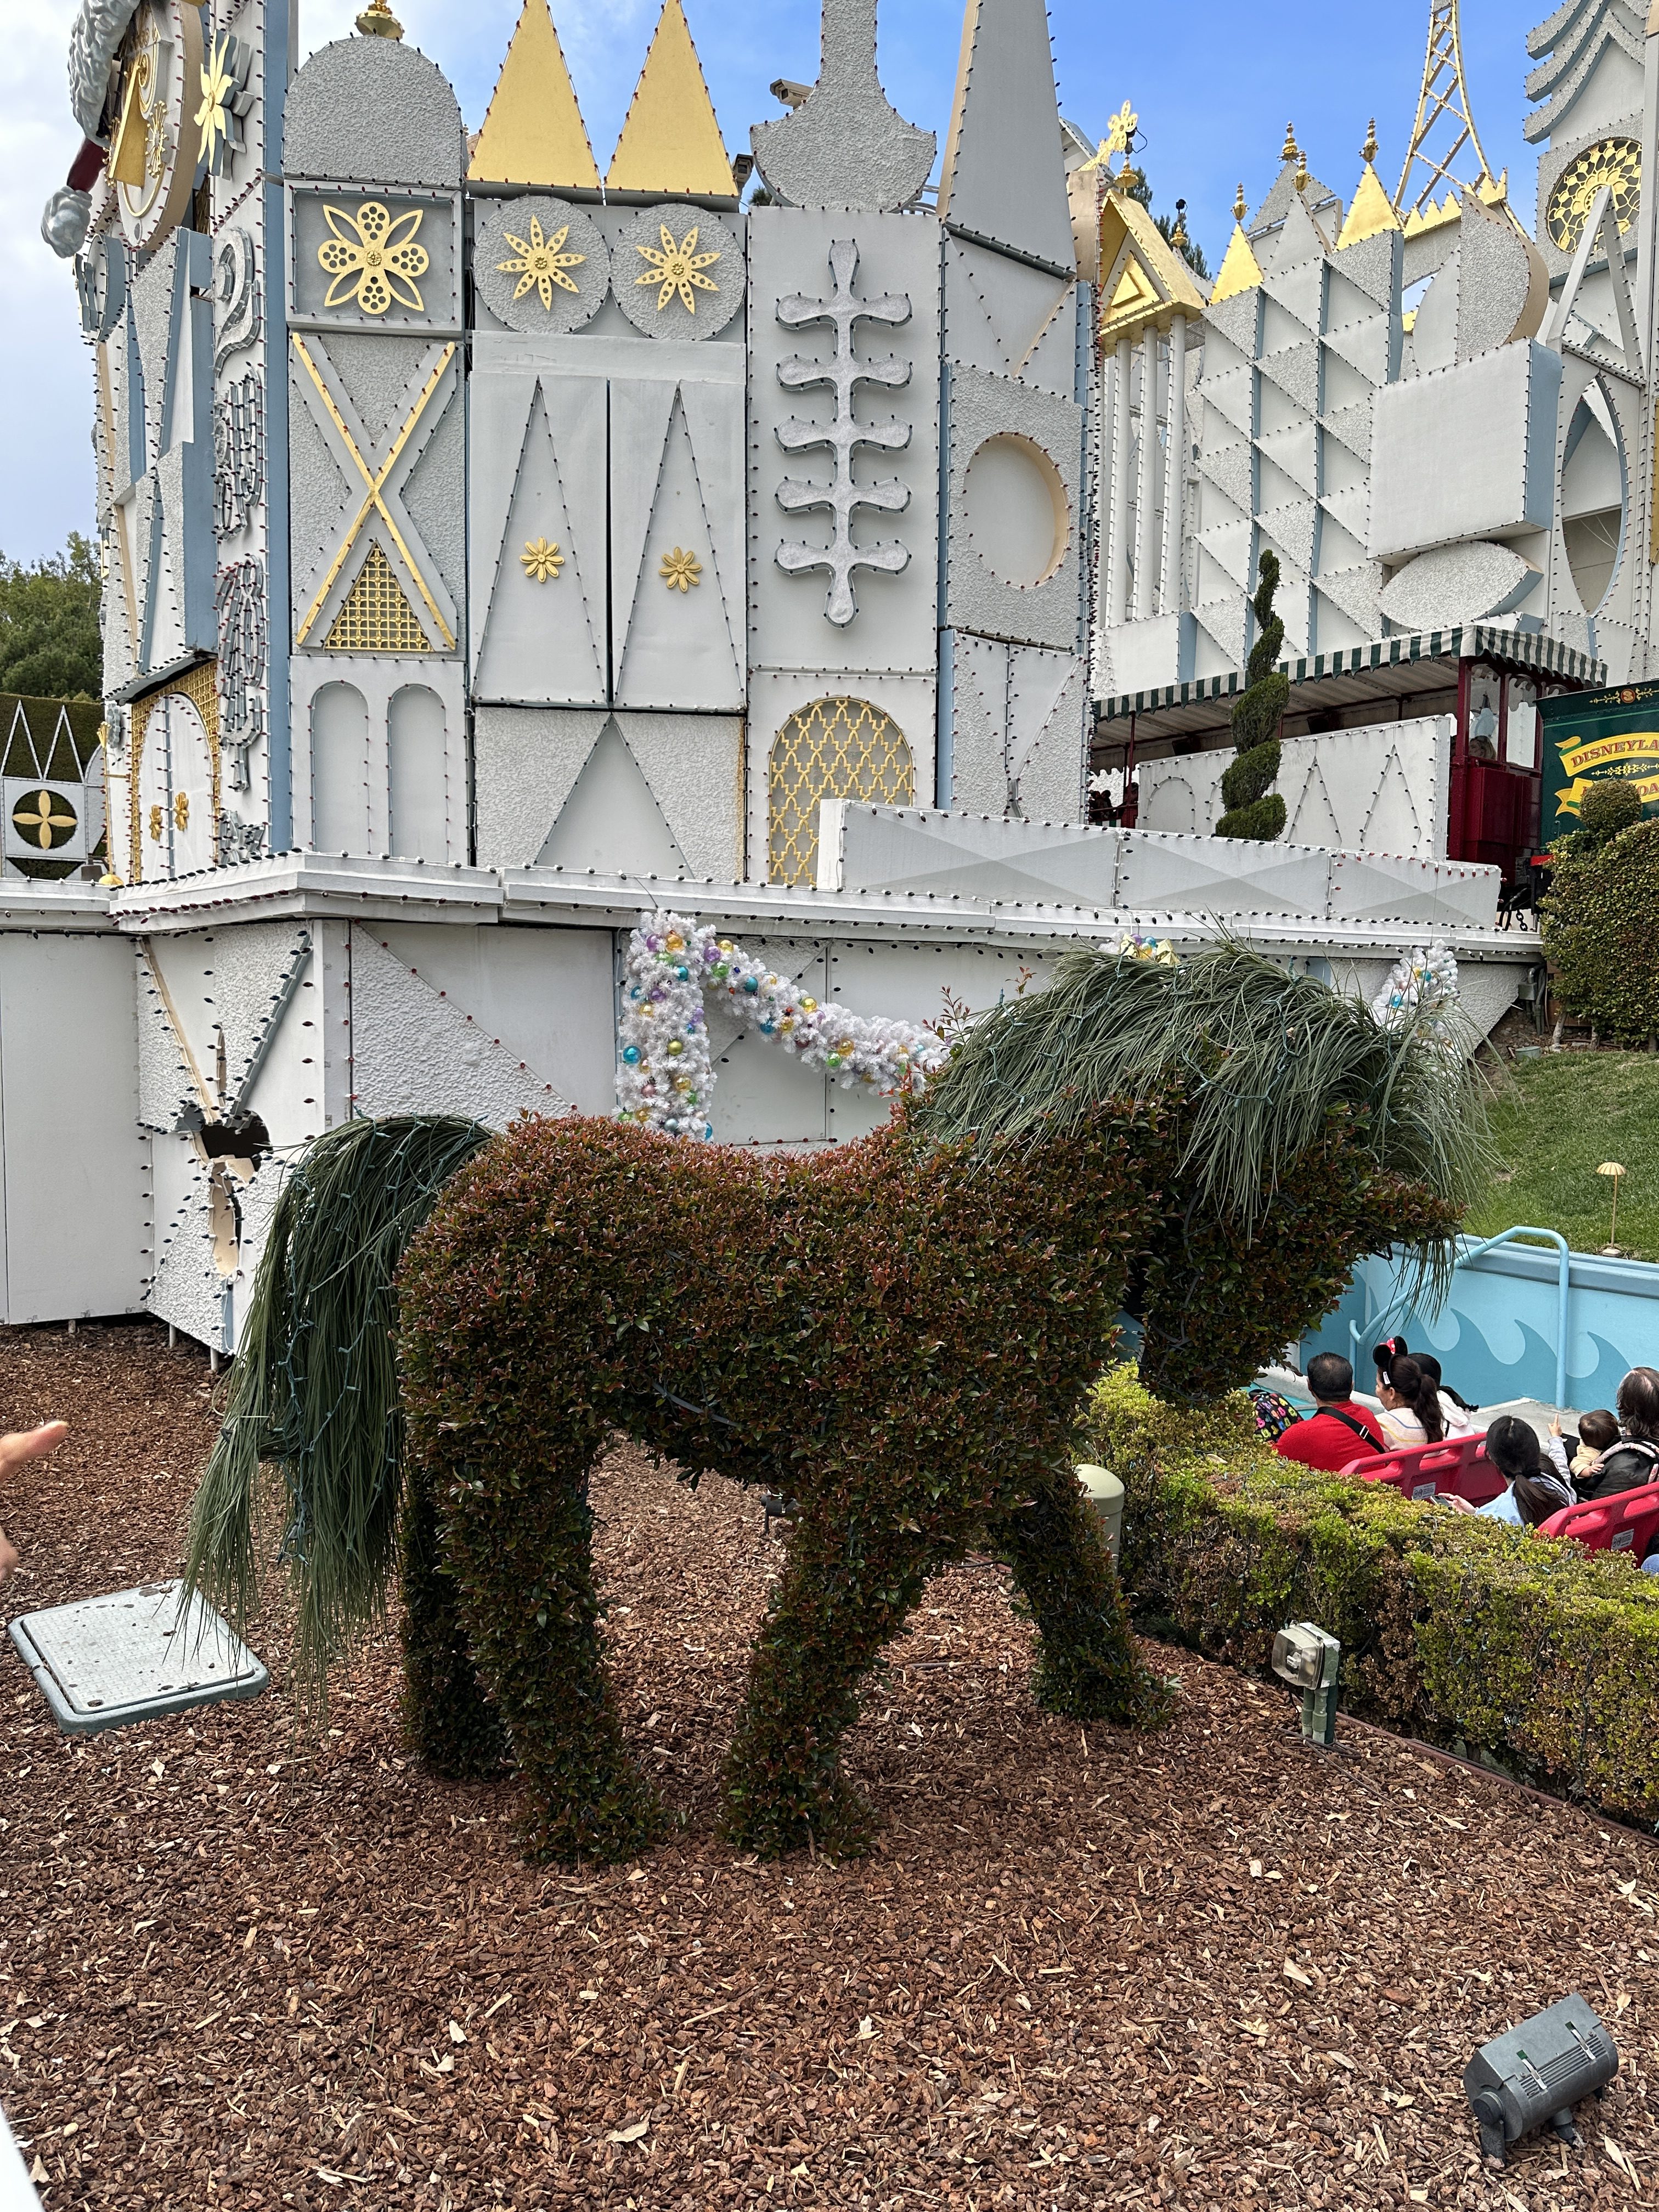 pony hedge at it's a small world holiday standard photographic style